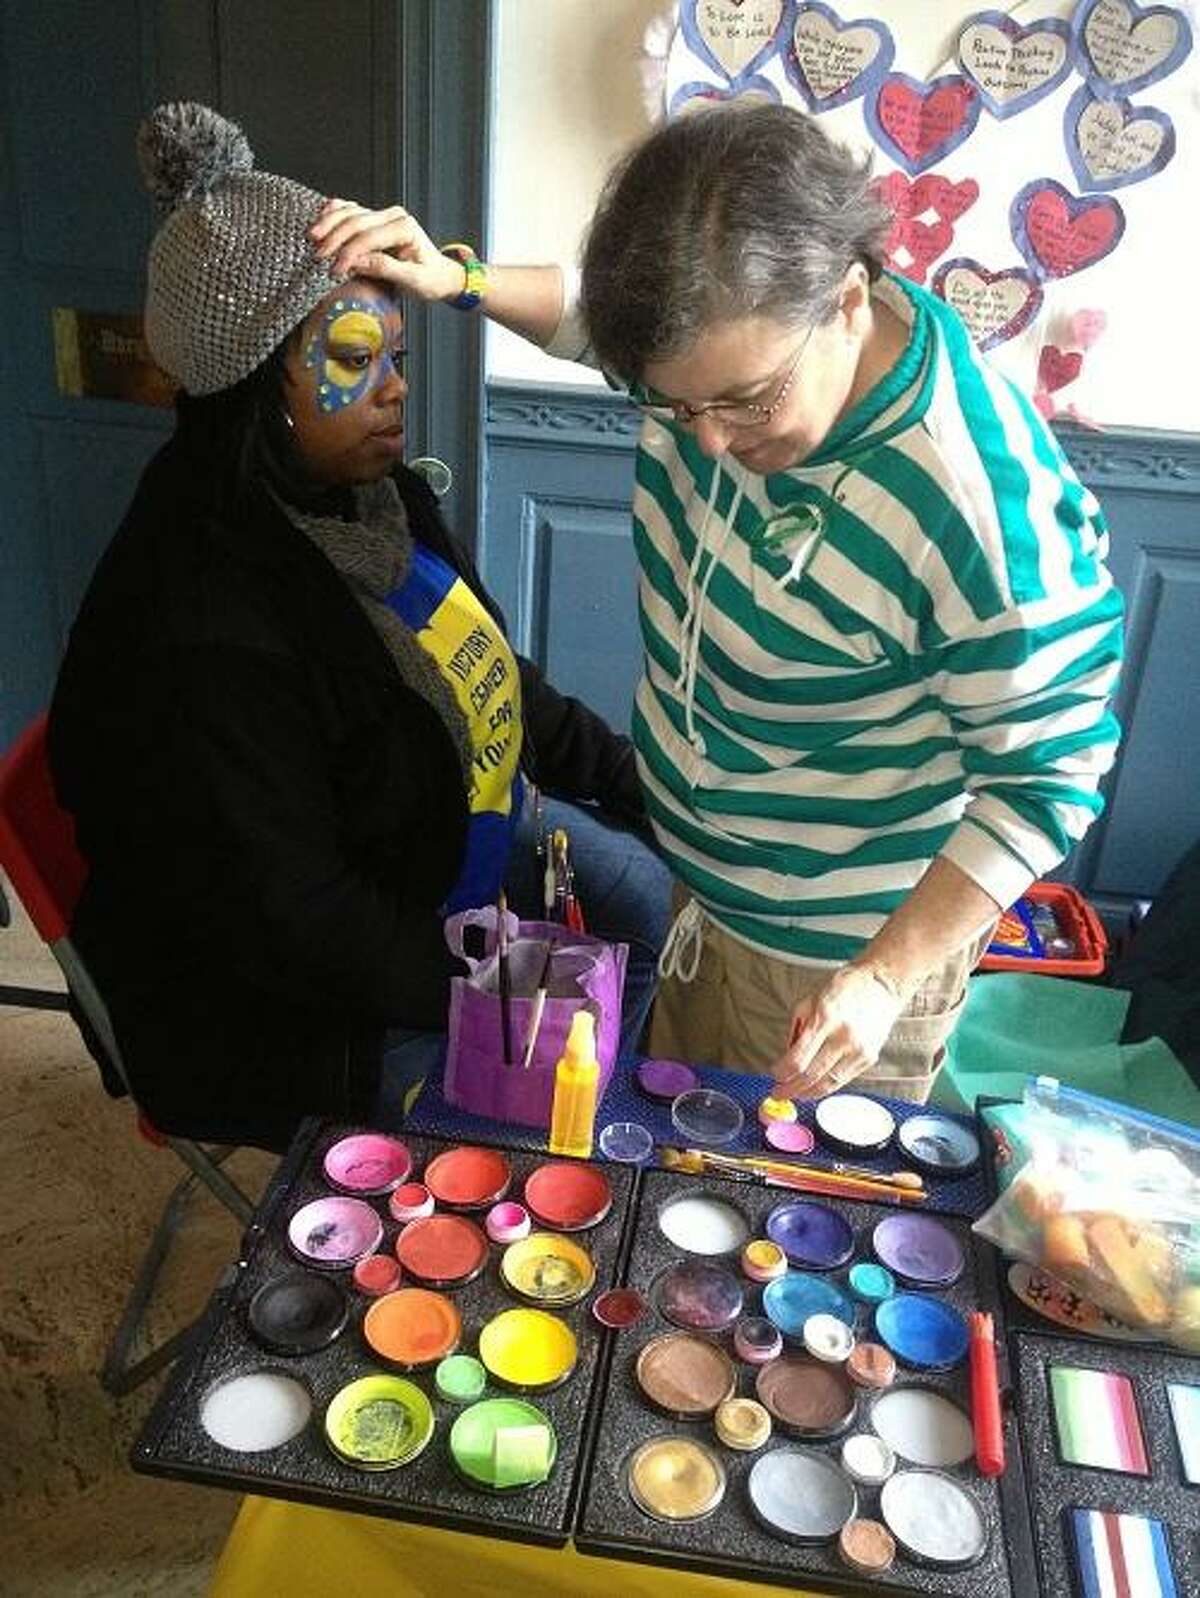 Pictured with painter Robbie Pack is Ericka Taylor of Pittsburgh, Pa. Pack, of Fairfield, Conn., came to Newtown to lift spirits by painting faces. Taylor came to Newtown with a friend to do outreach with Victory Center for Youth, of Cleveland.